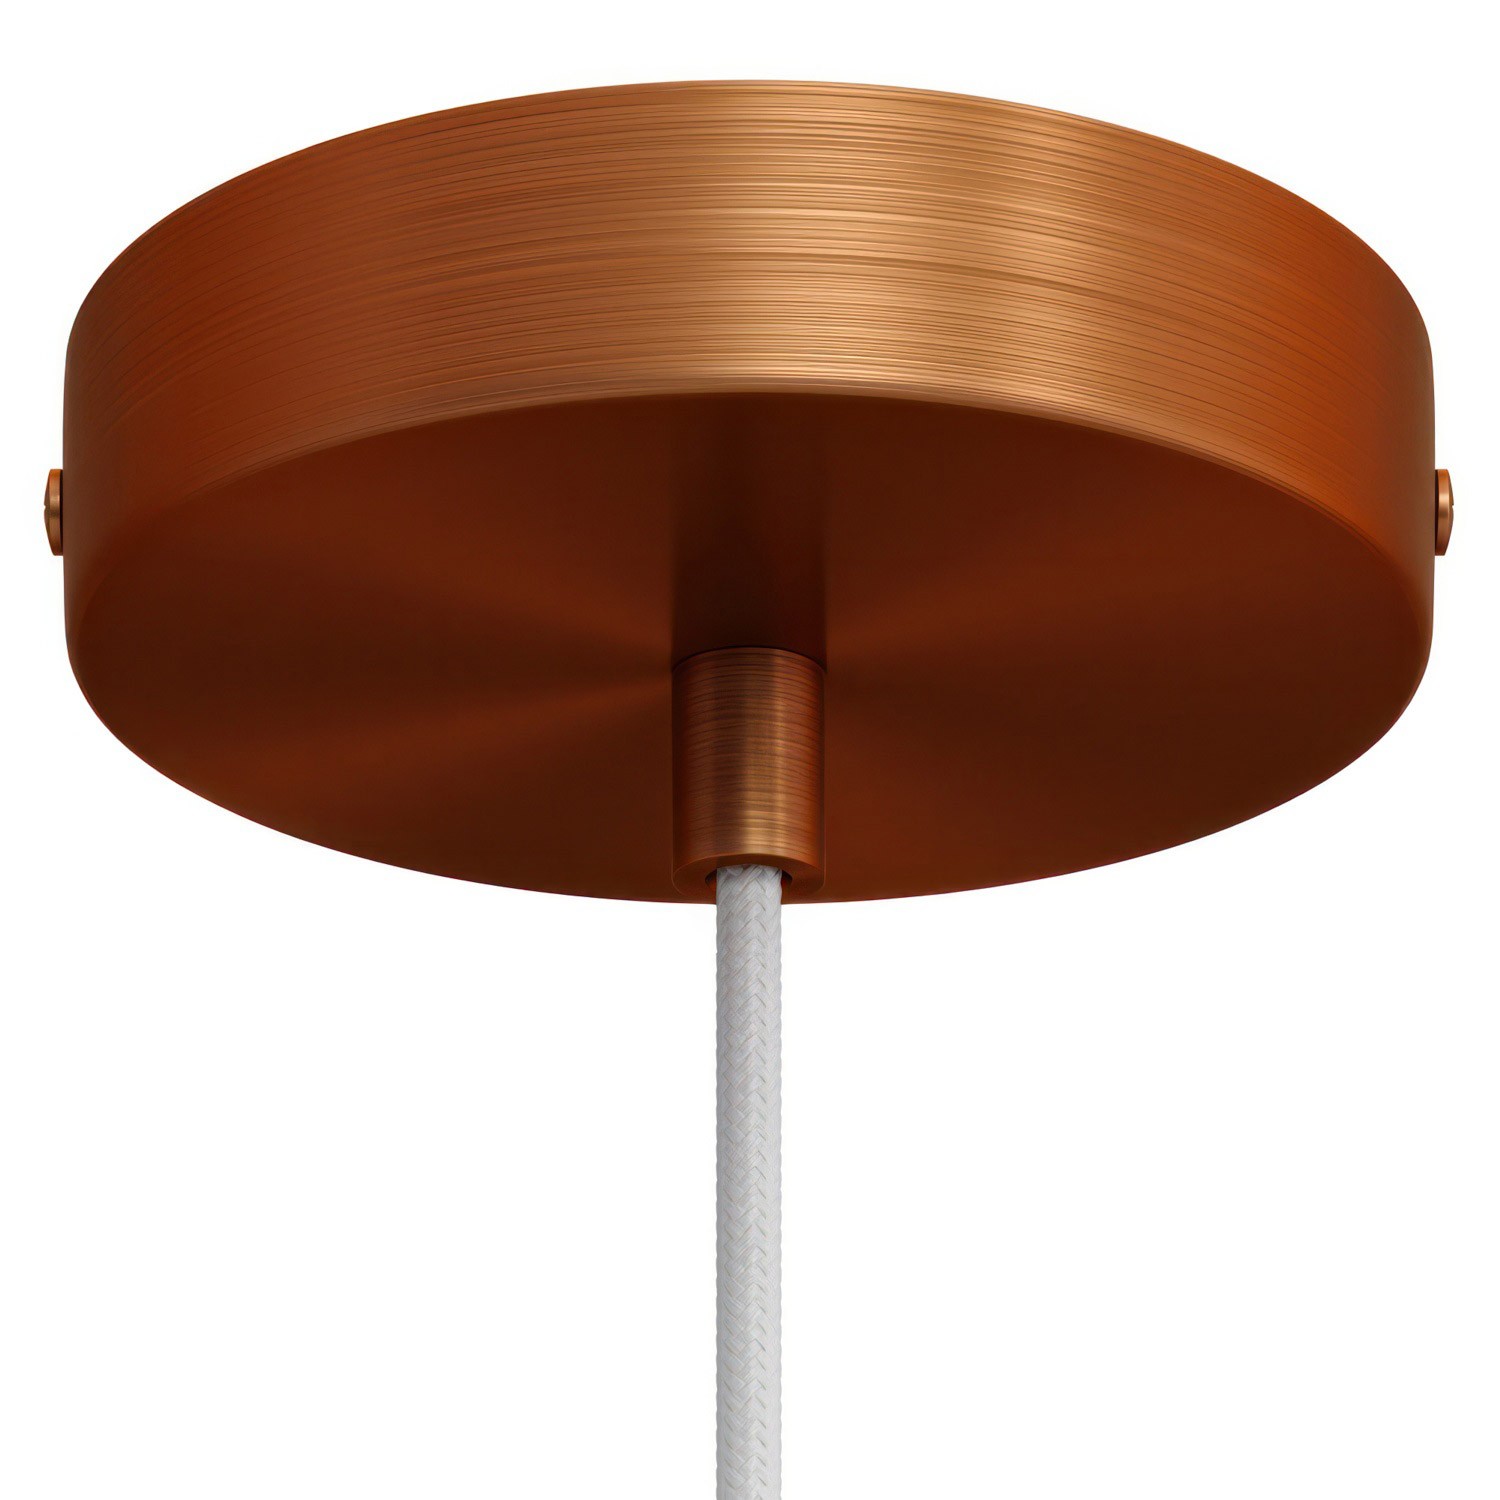 Cylindrical metal ceiling rose kit